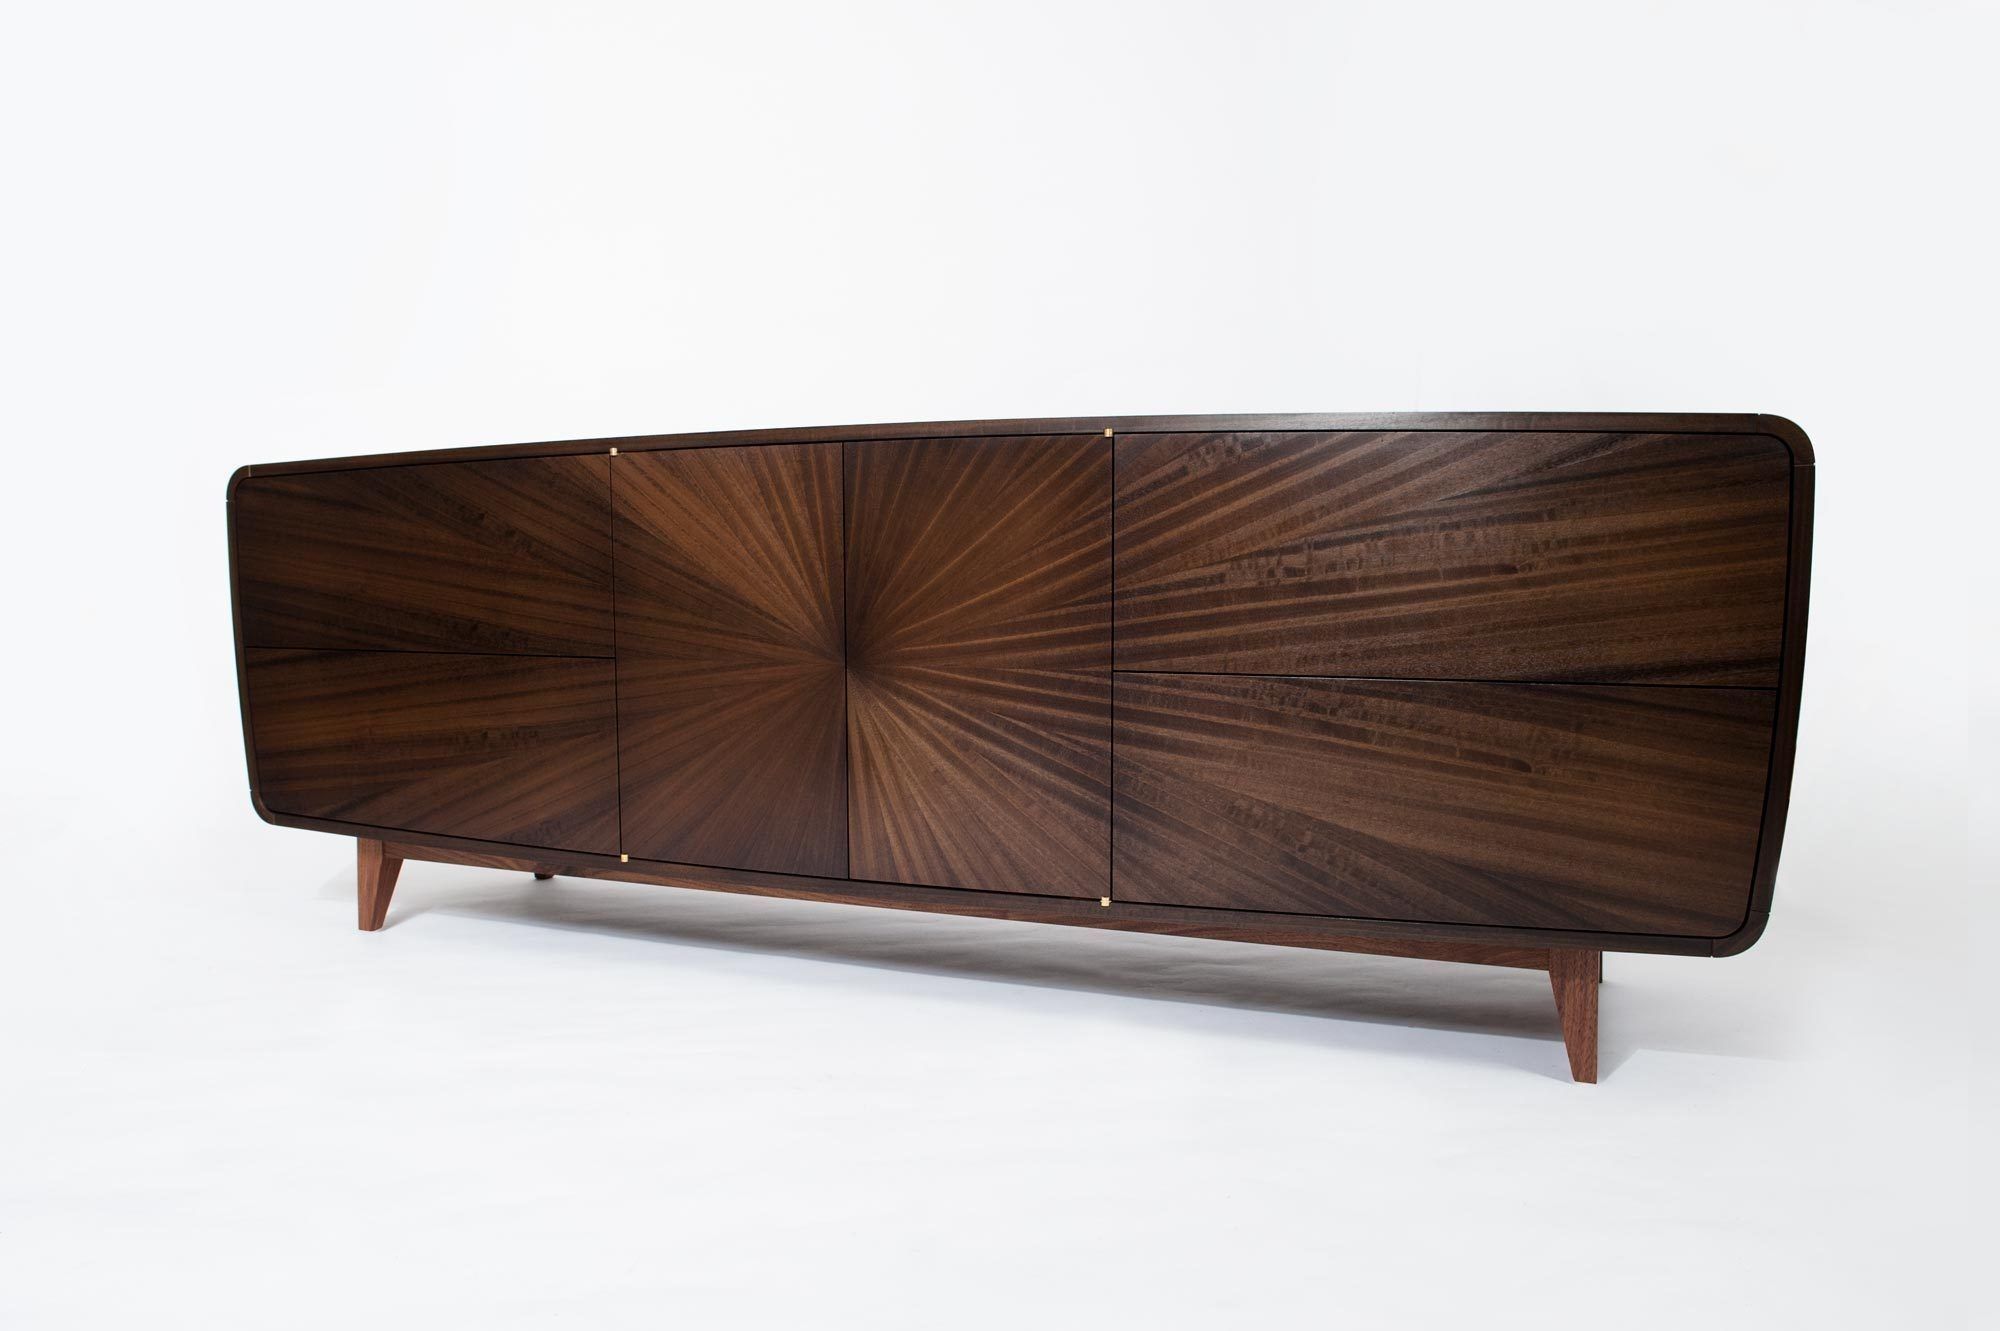 Jack Pawsey  A Contemporary Sideboard Design – Fine Furniture Maker For Walnut Finish Contempo Sideboards (View 2 of 30)